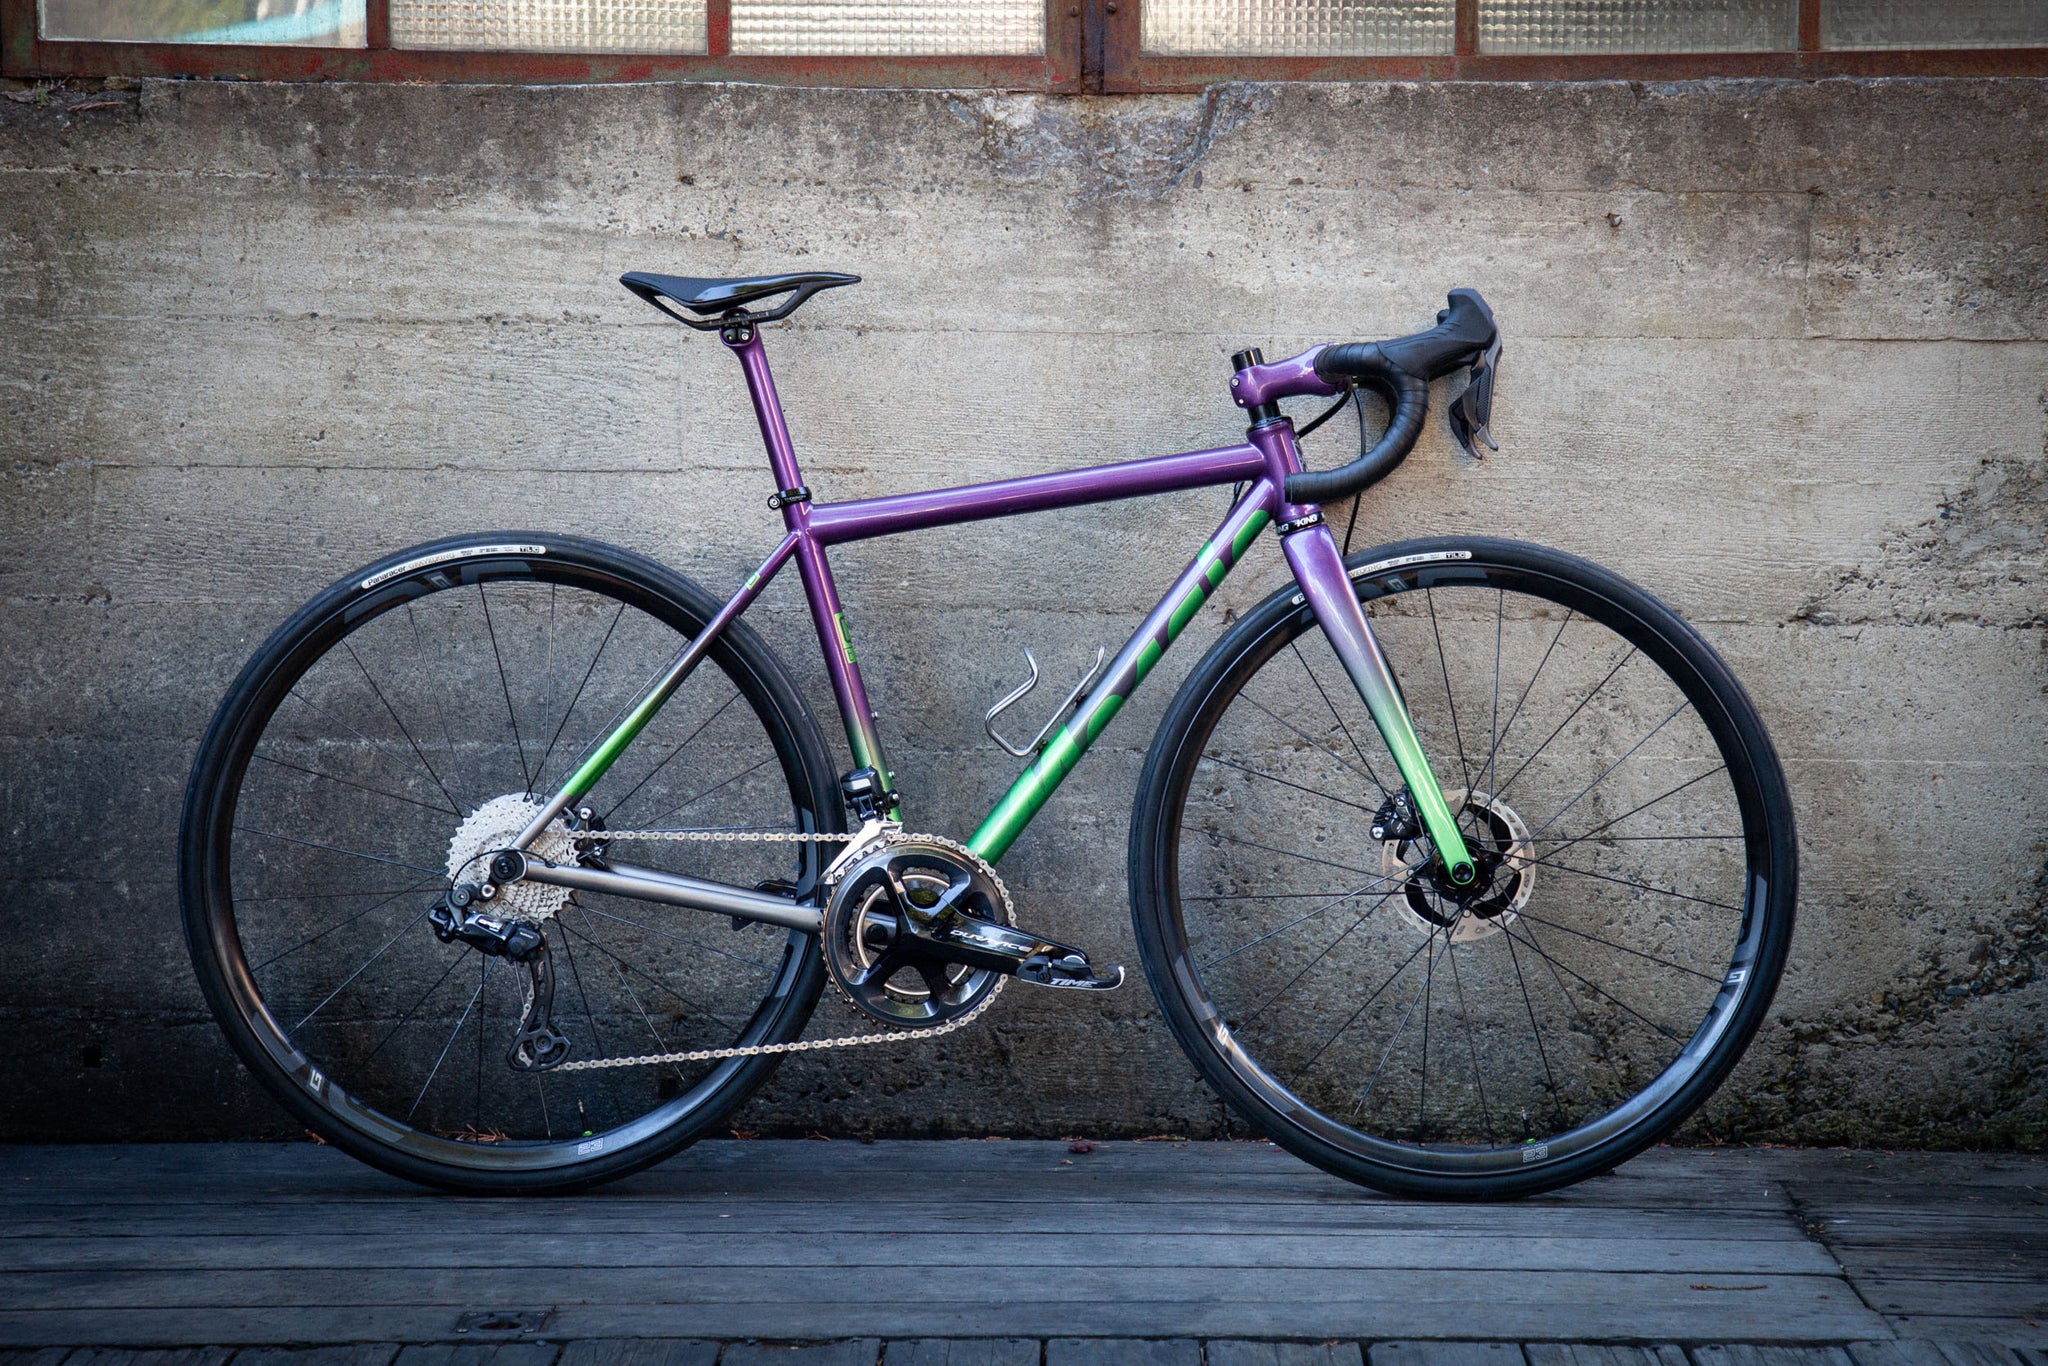 Gallery: A Purlpe-Green Mosaic All-Roader